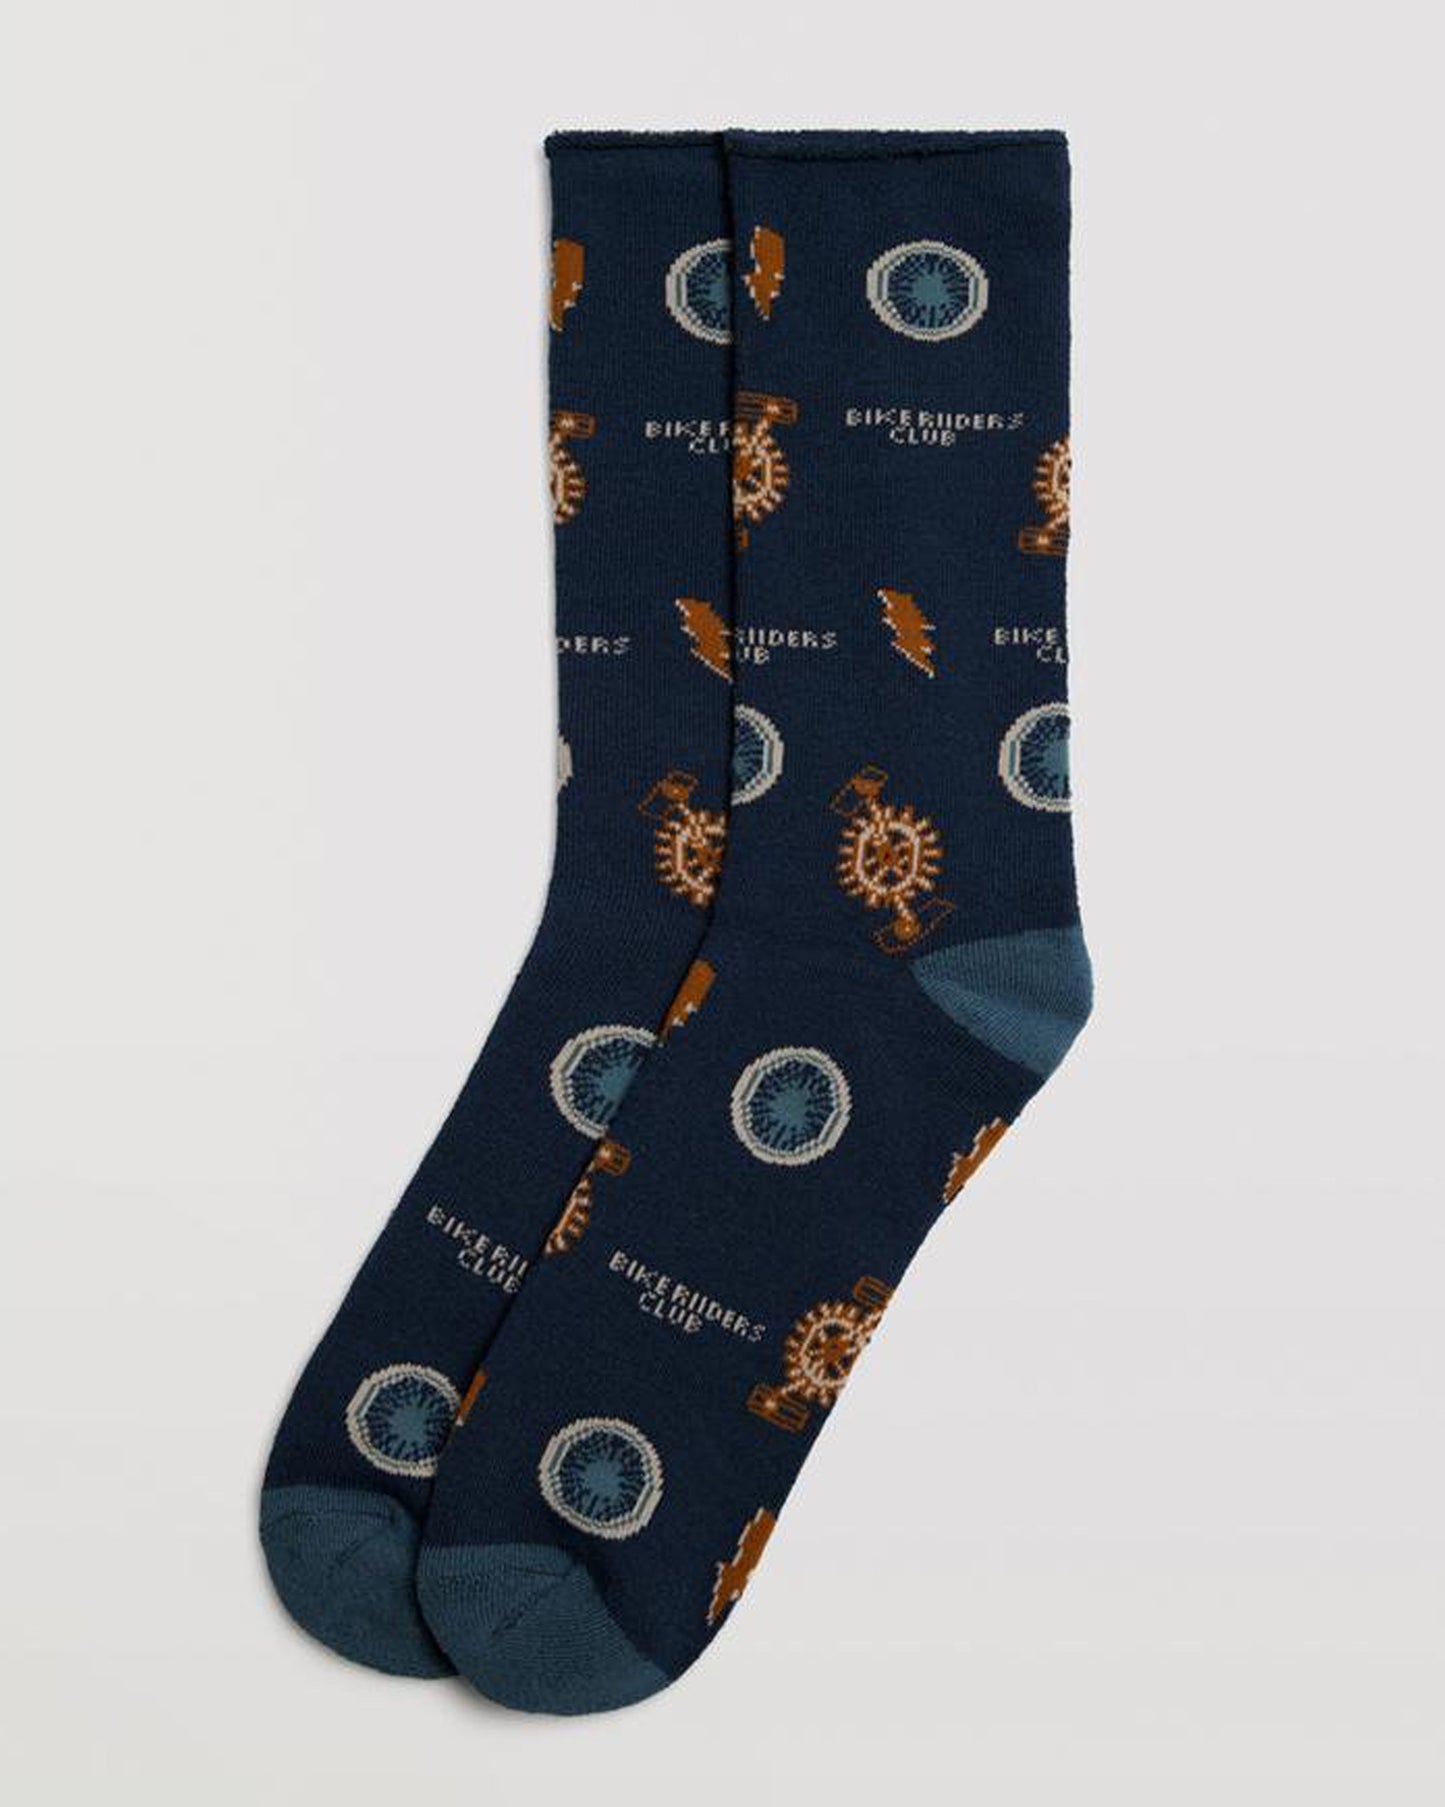 Ysabel Mora 22887 Bike Riders Club Sock - Thick and warm terry lined navy blue cotton crew length no cuff ankle socks with an all over pattern of bicycle parts (wheels and pedals), lightning bolts and the text "bike riders club".